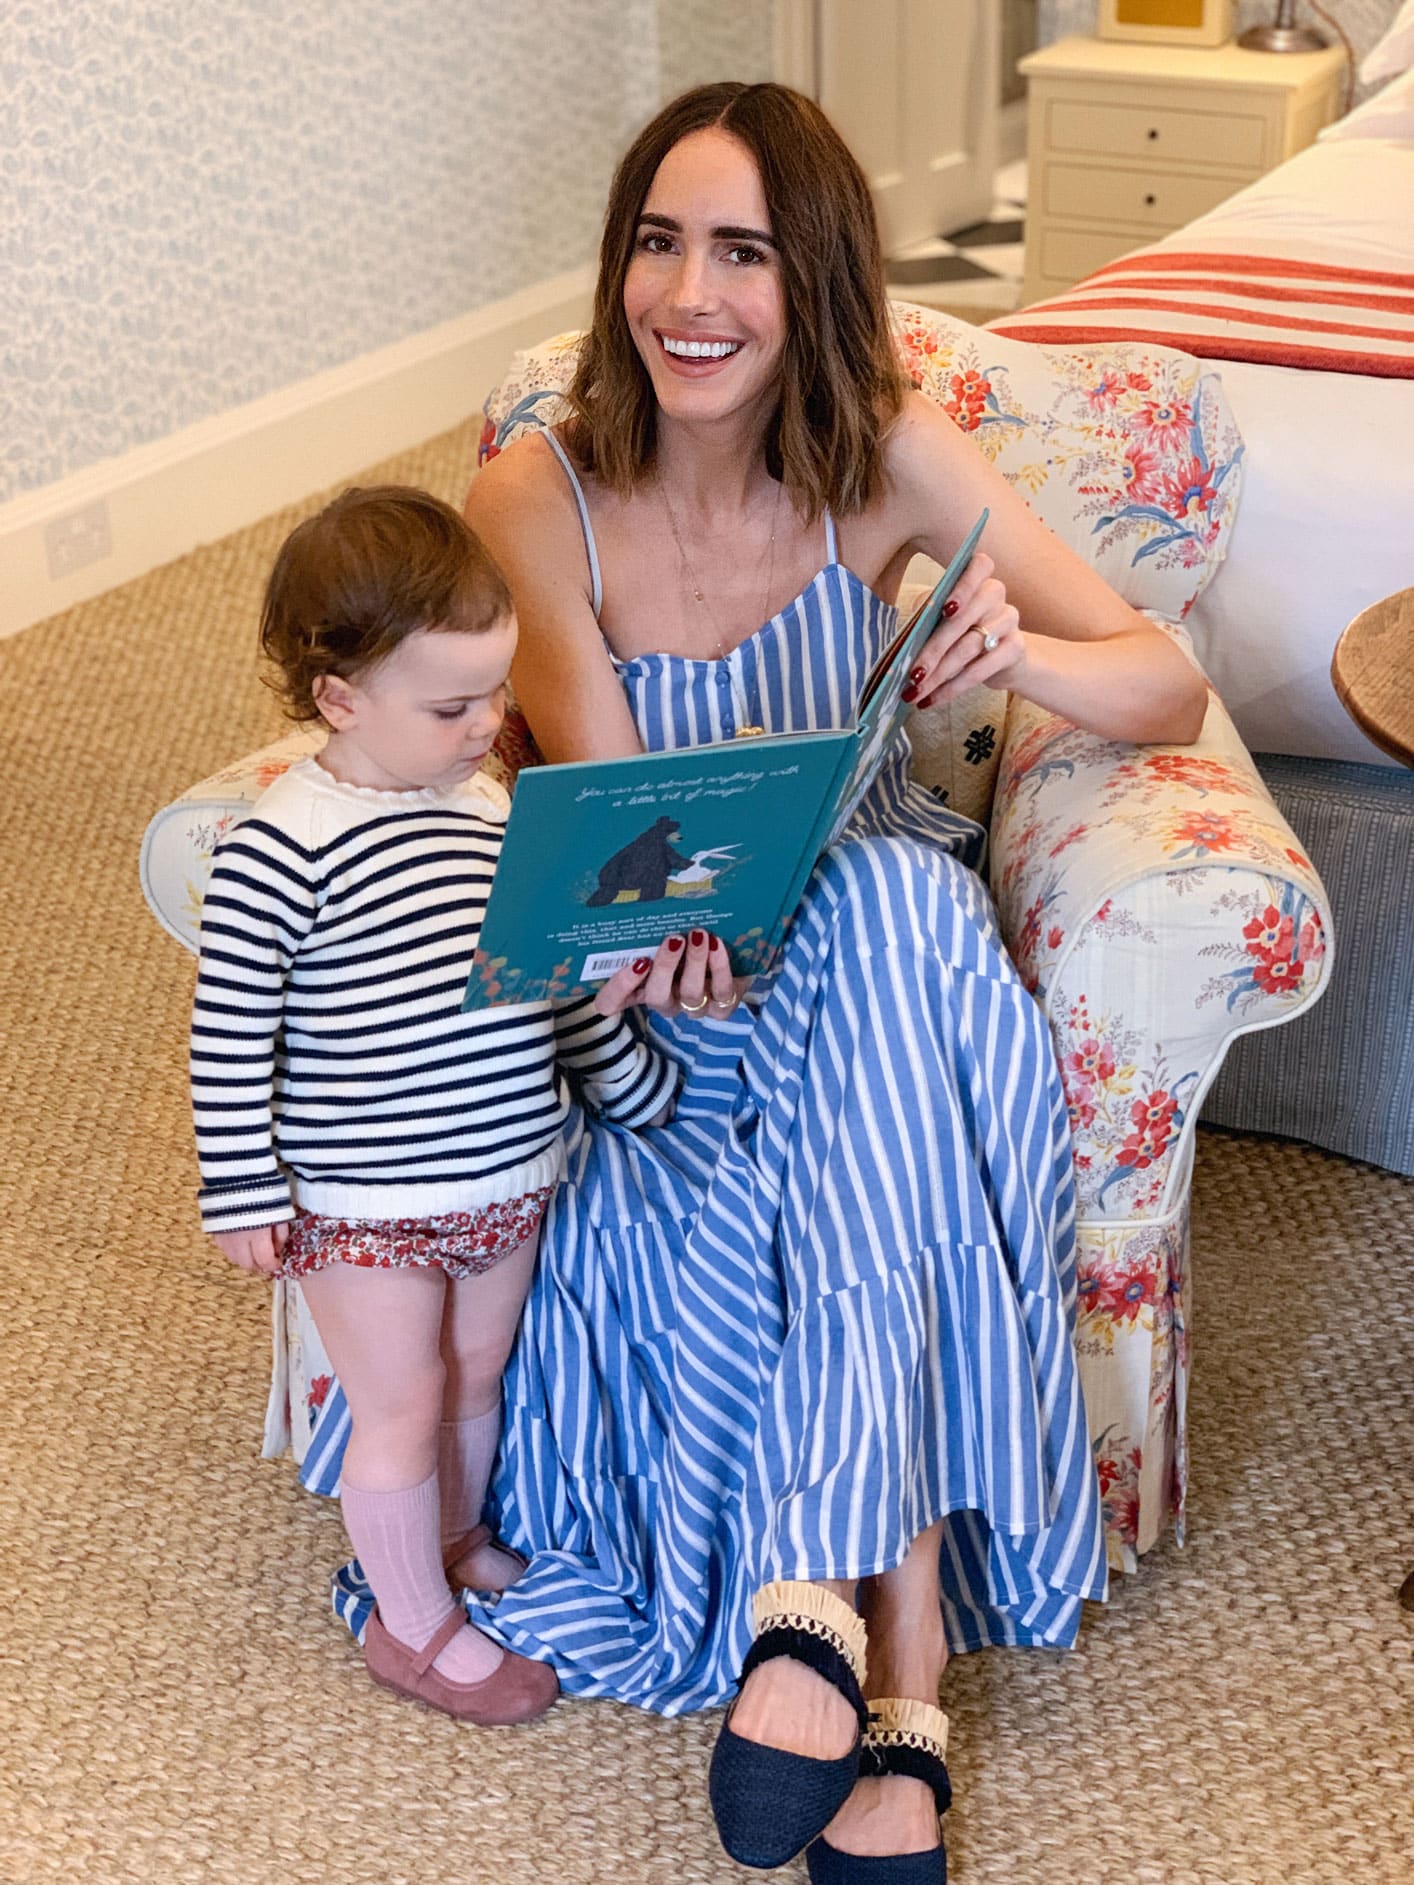 The Empowering Books I Read To My Daughter